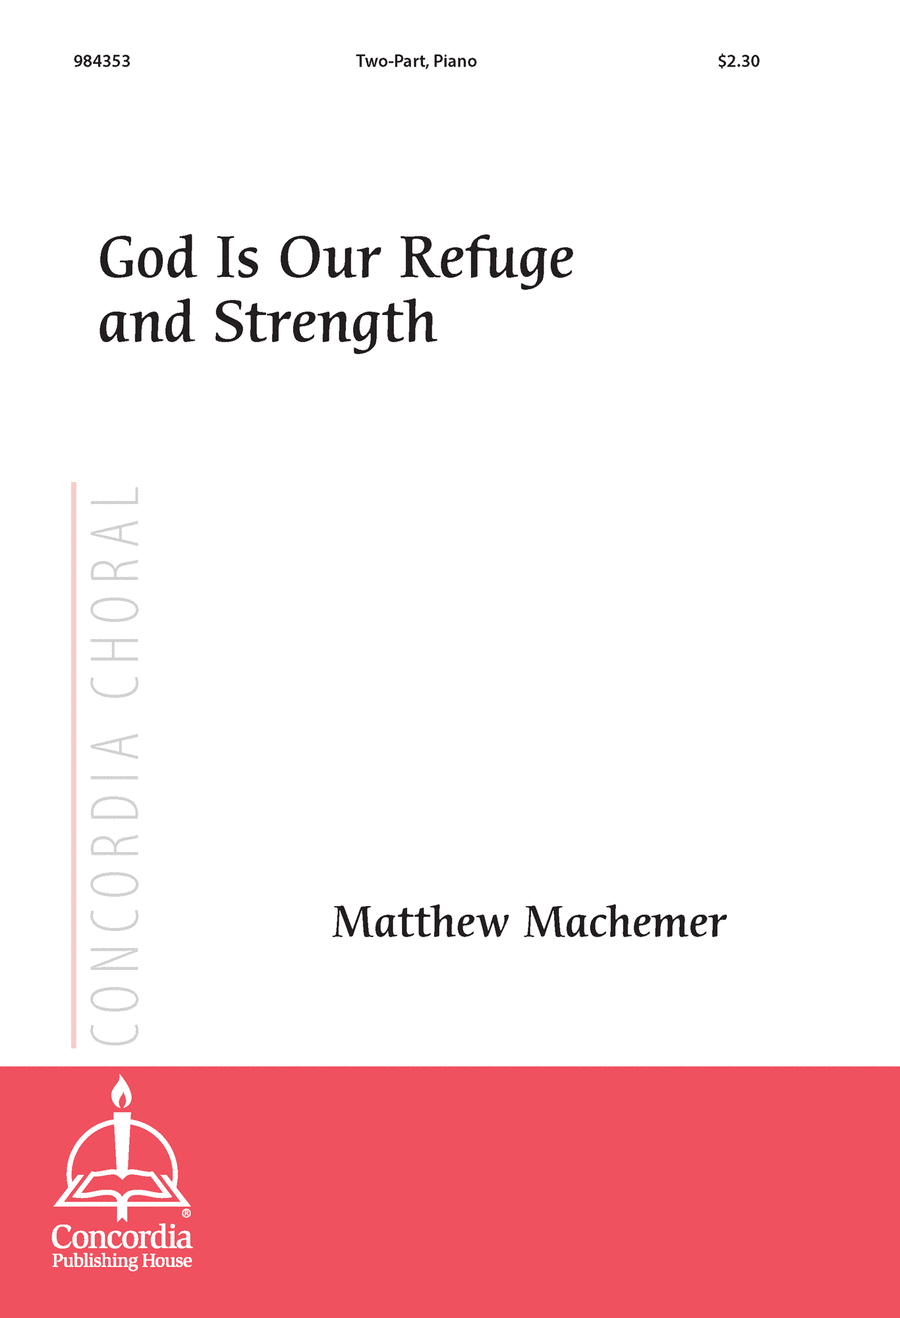 God Is Our Refuge and Strength (Machemer)